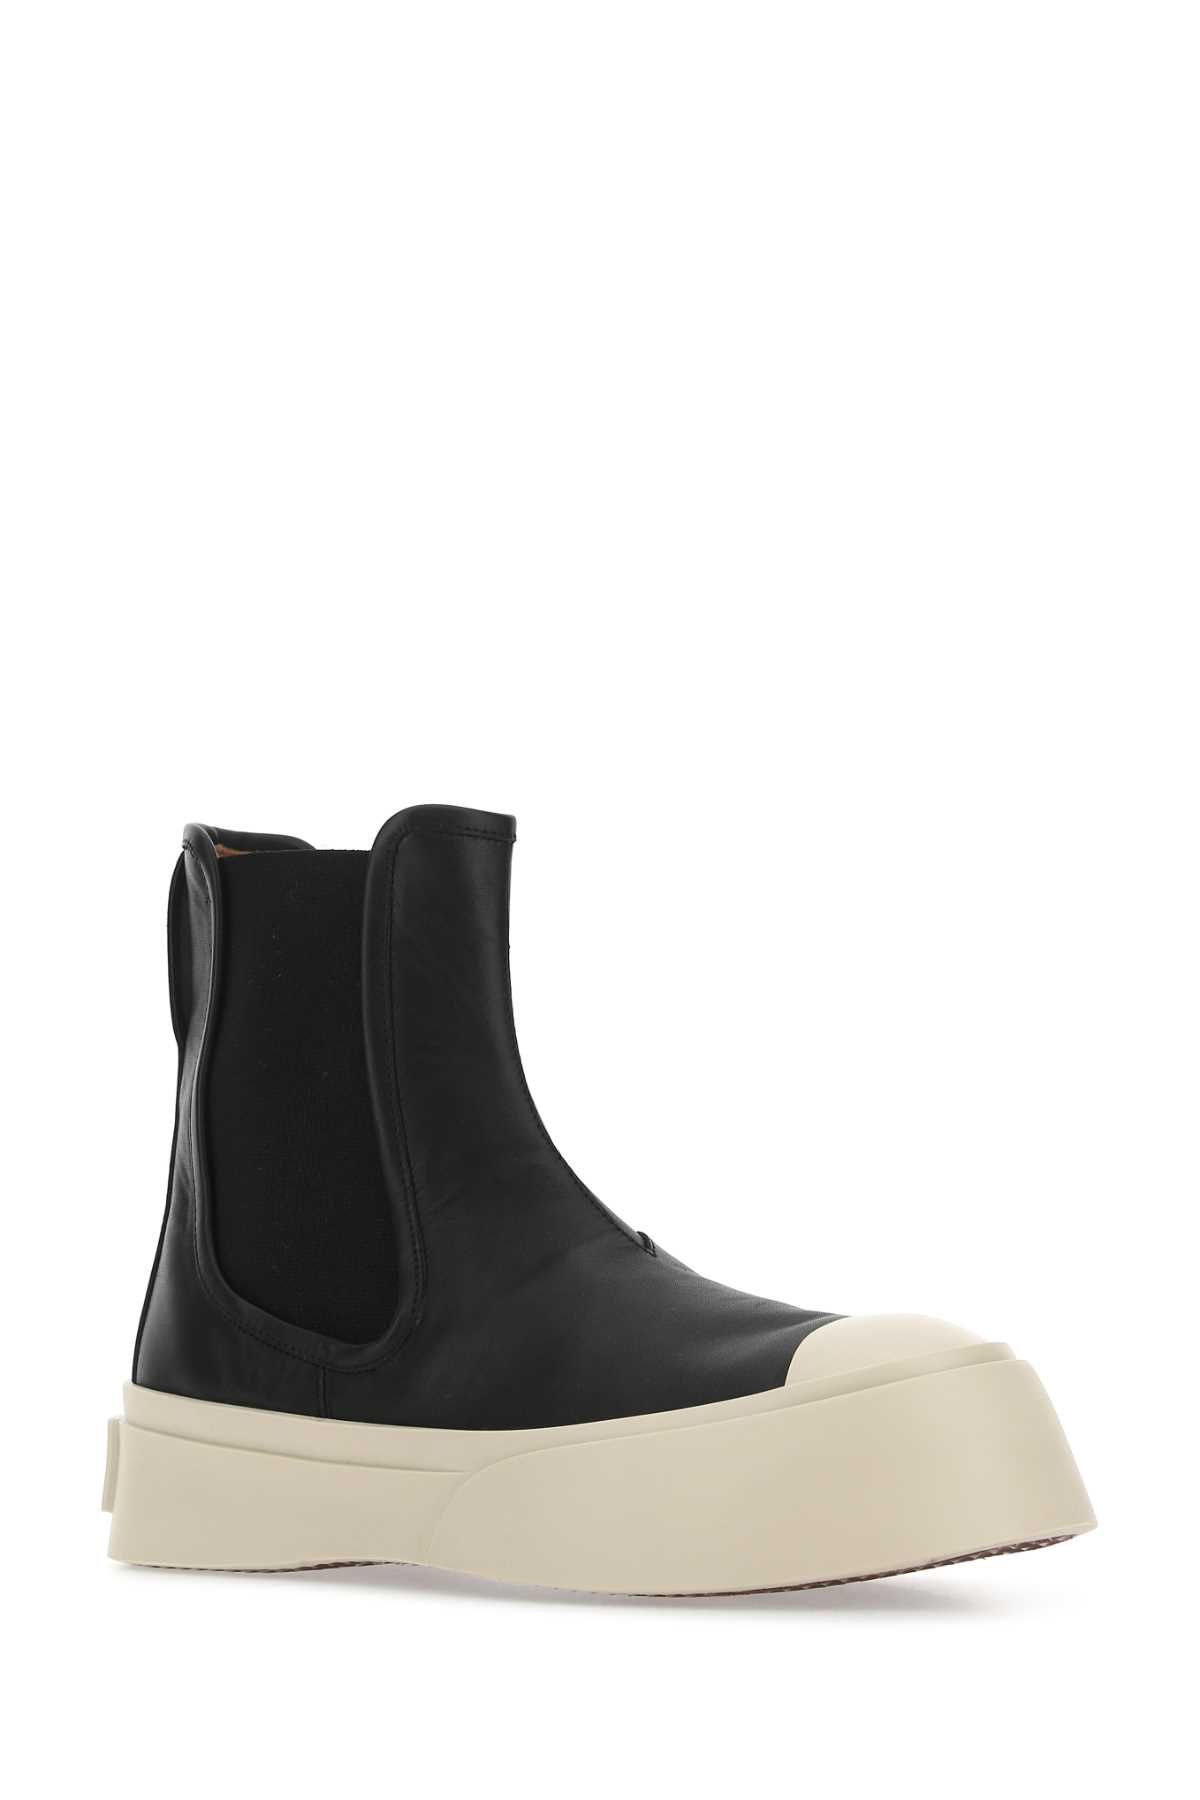 MARNI BLACK NAPPA LEATHER PABLO ANKLE BOOTS